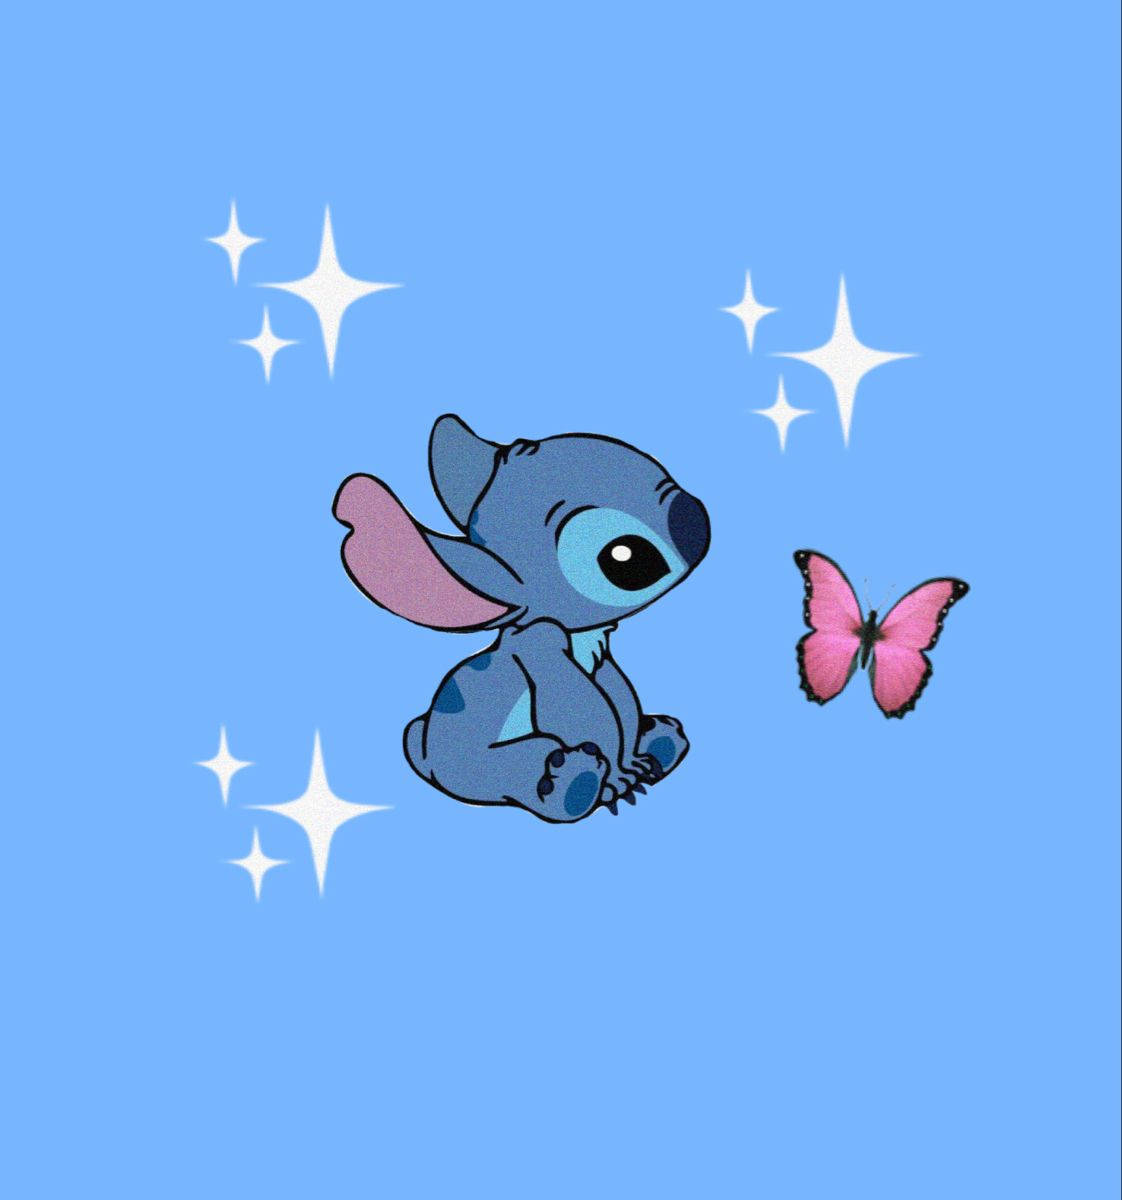 Discover More Than 85 Cute Stitch Wallpapers For Ipad Super Hot In